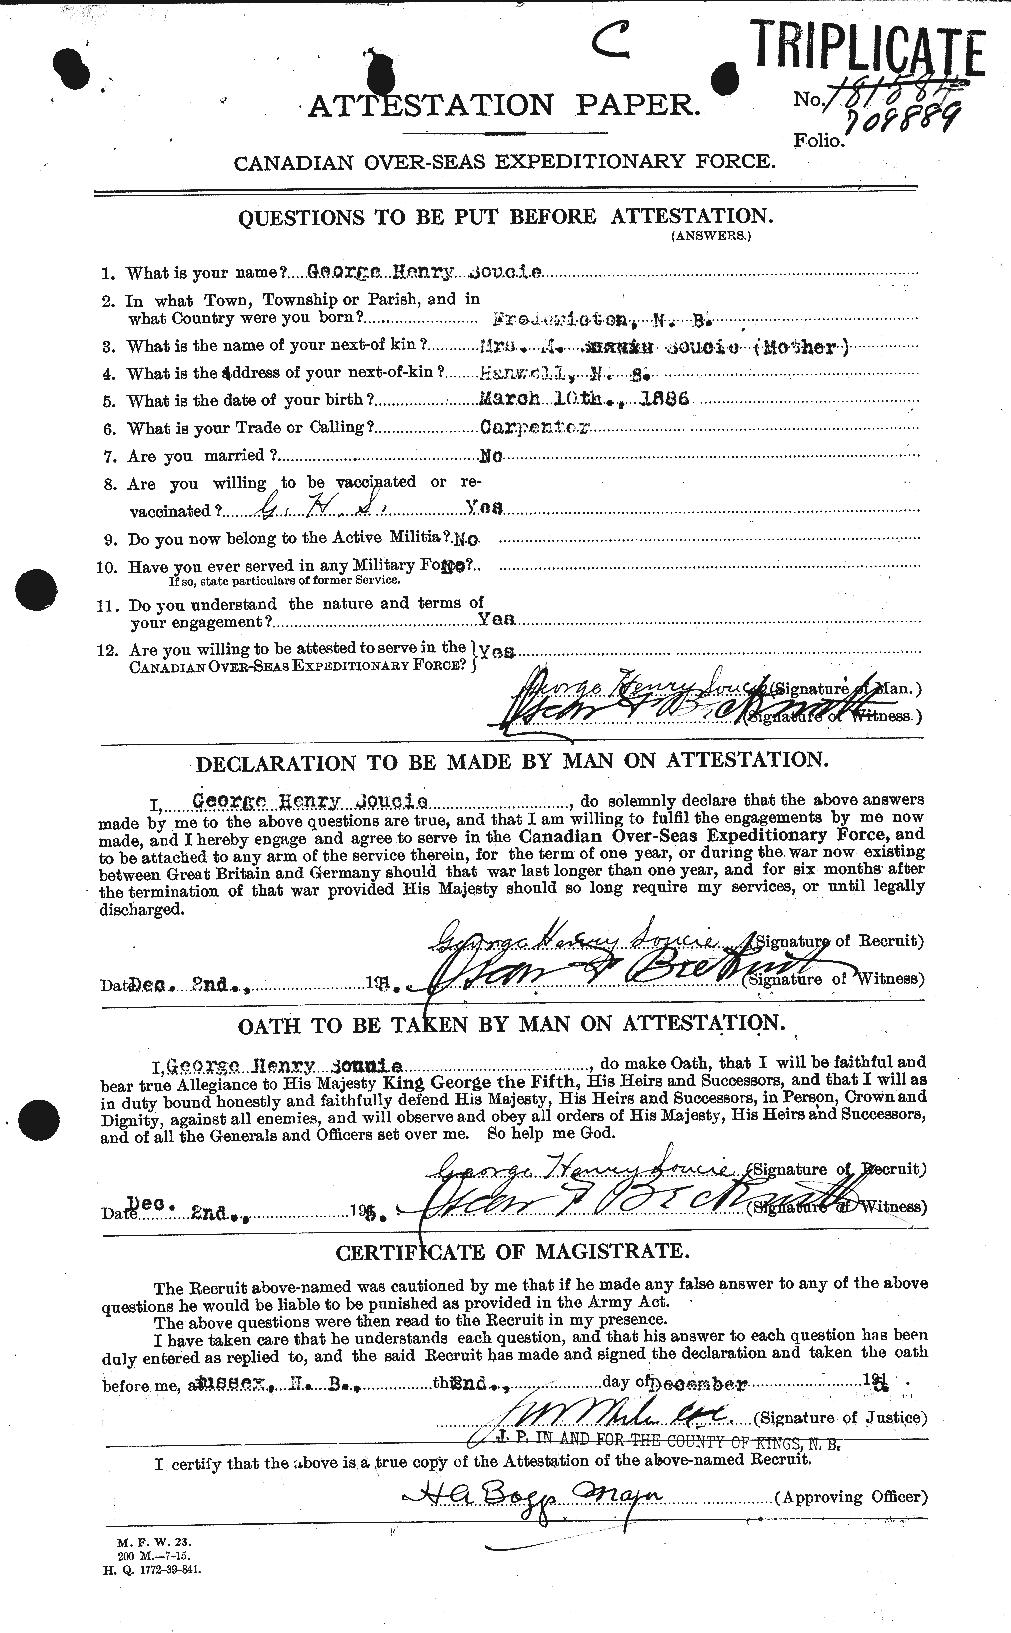 Personnel Records of the First World War - CEF 109600a